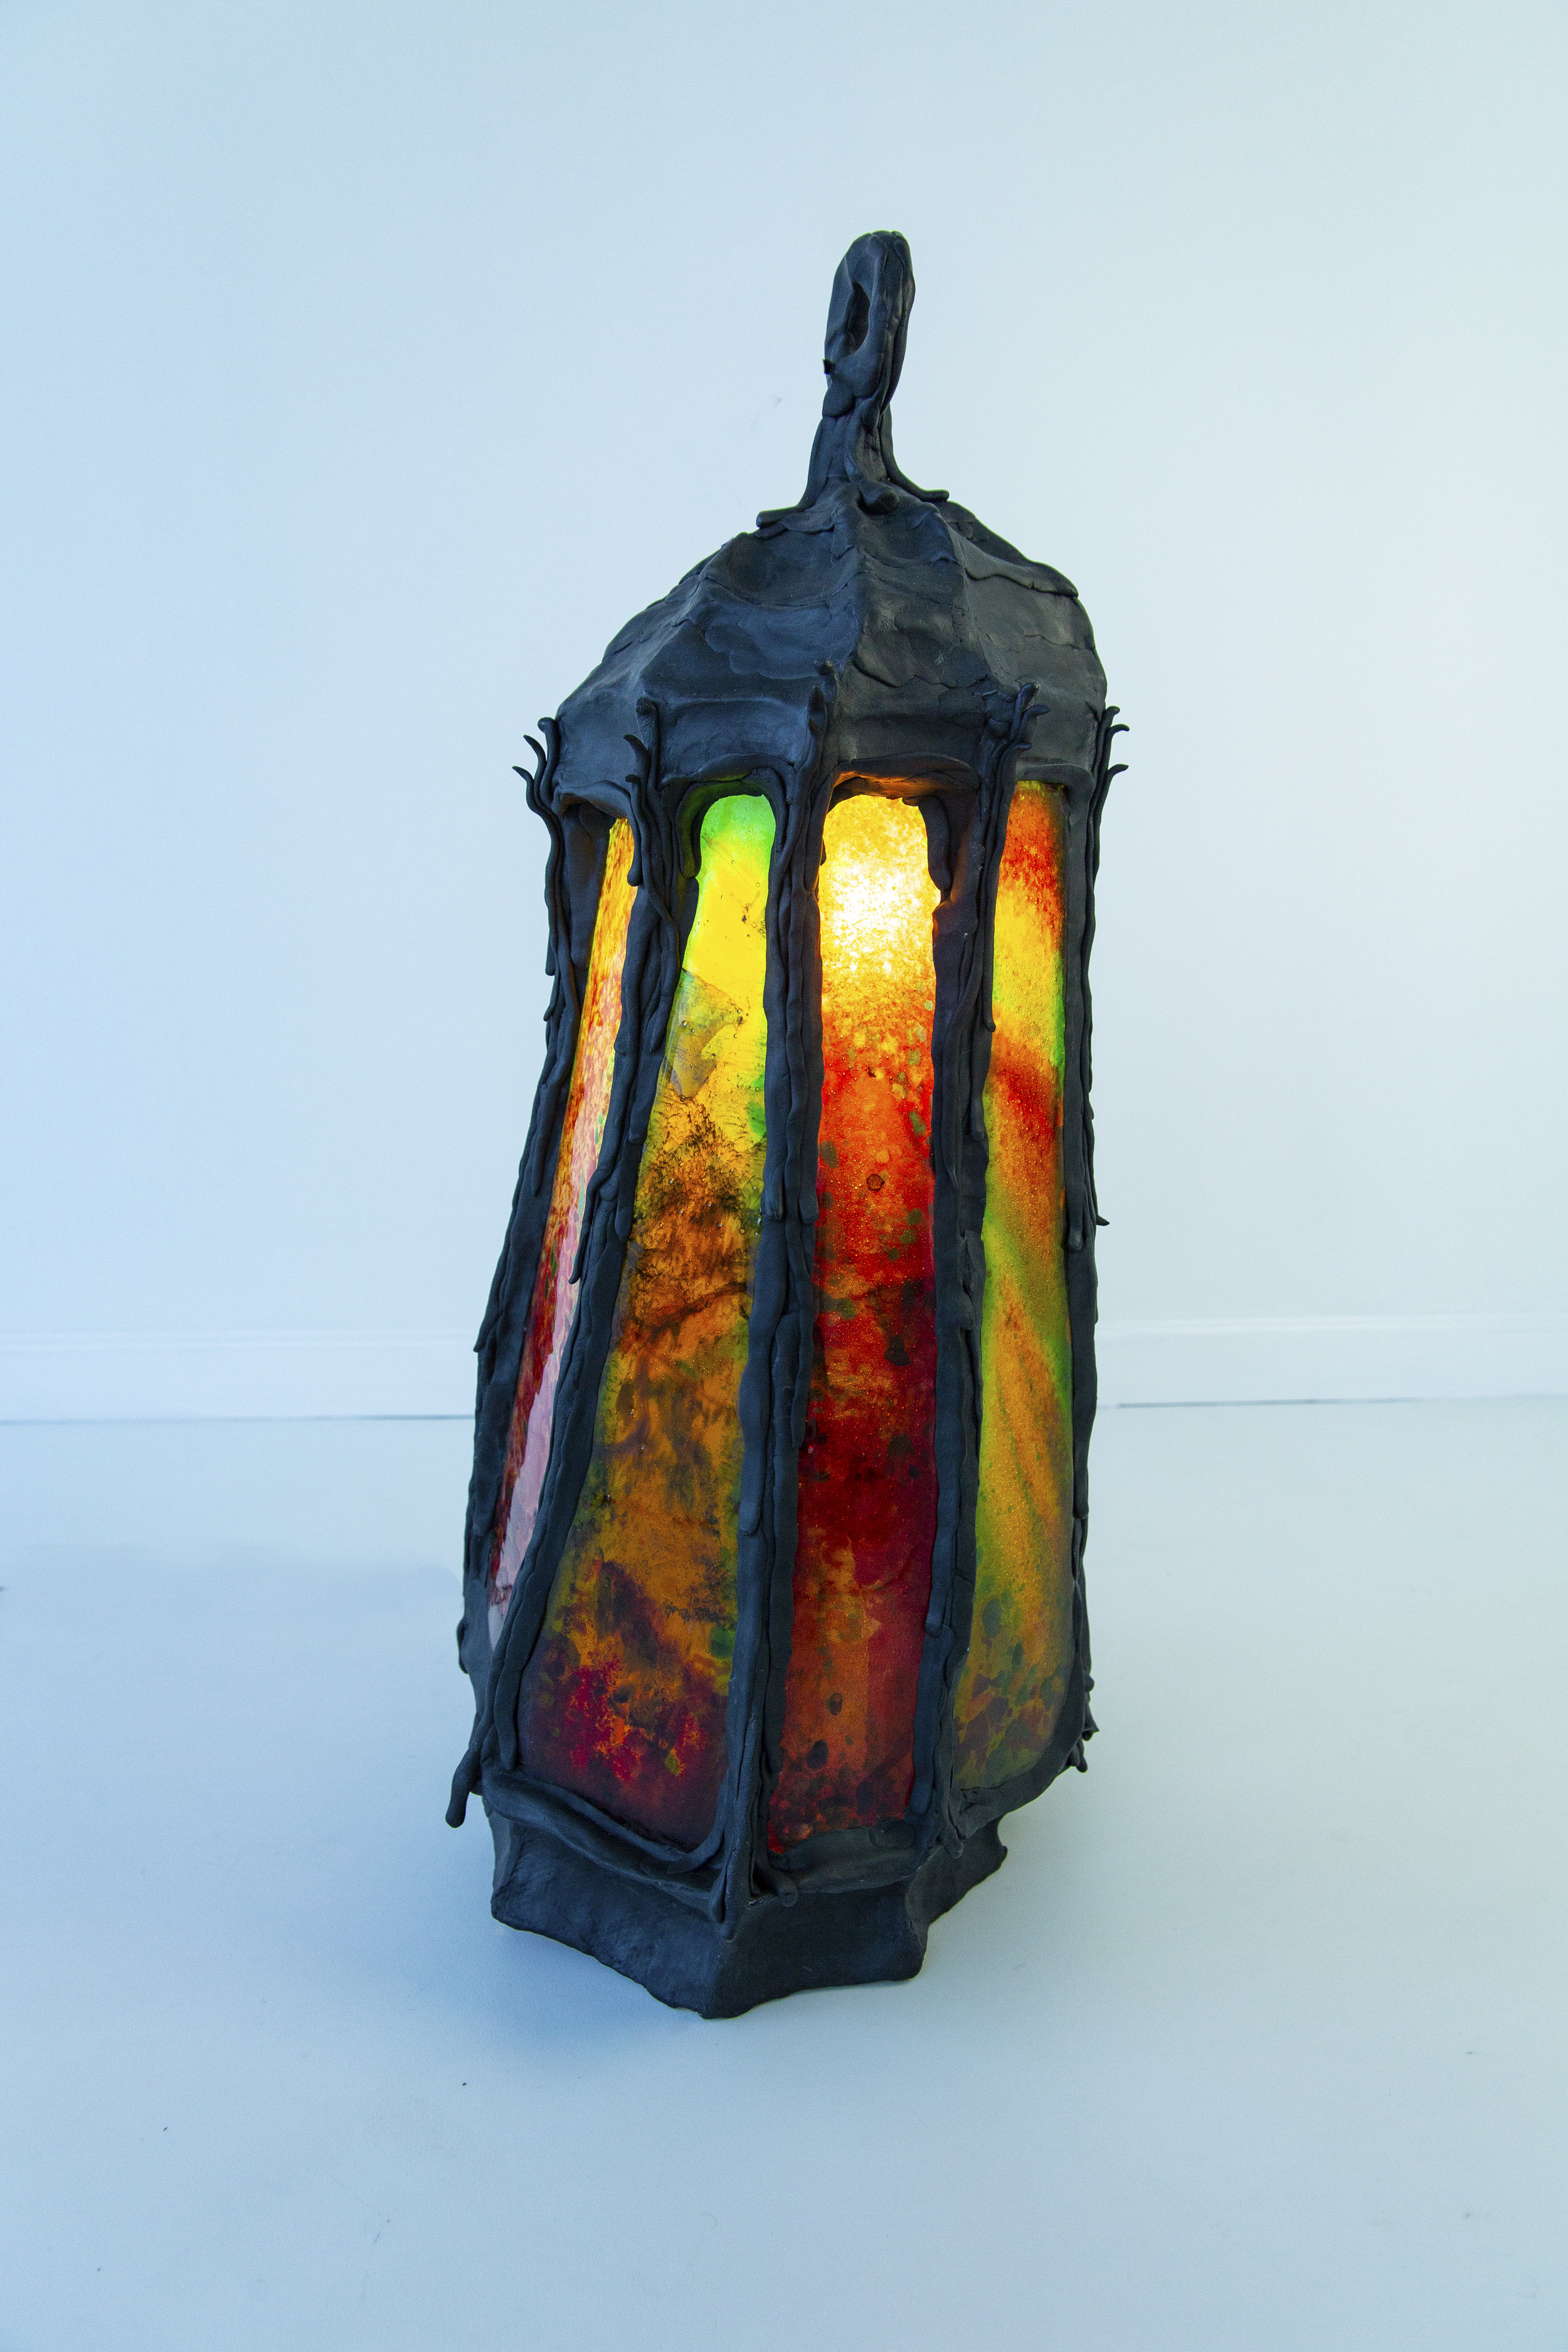  Dani Tull Lantern 1, 2019 Mixed materials and fused-glass  31” x 17 x 17” 